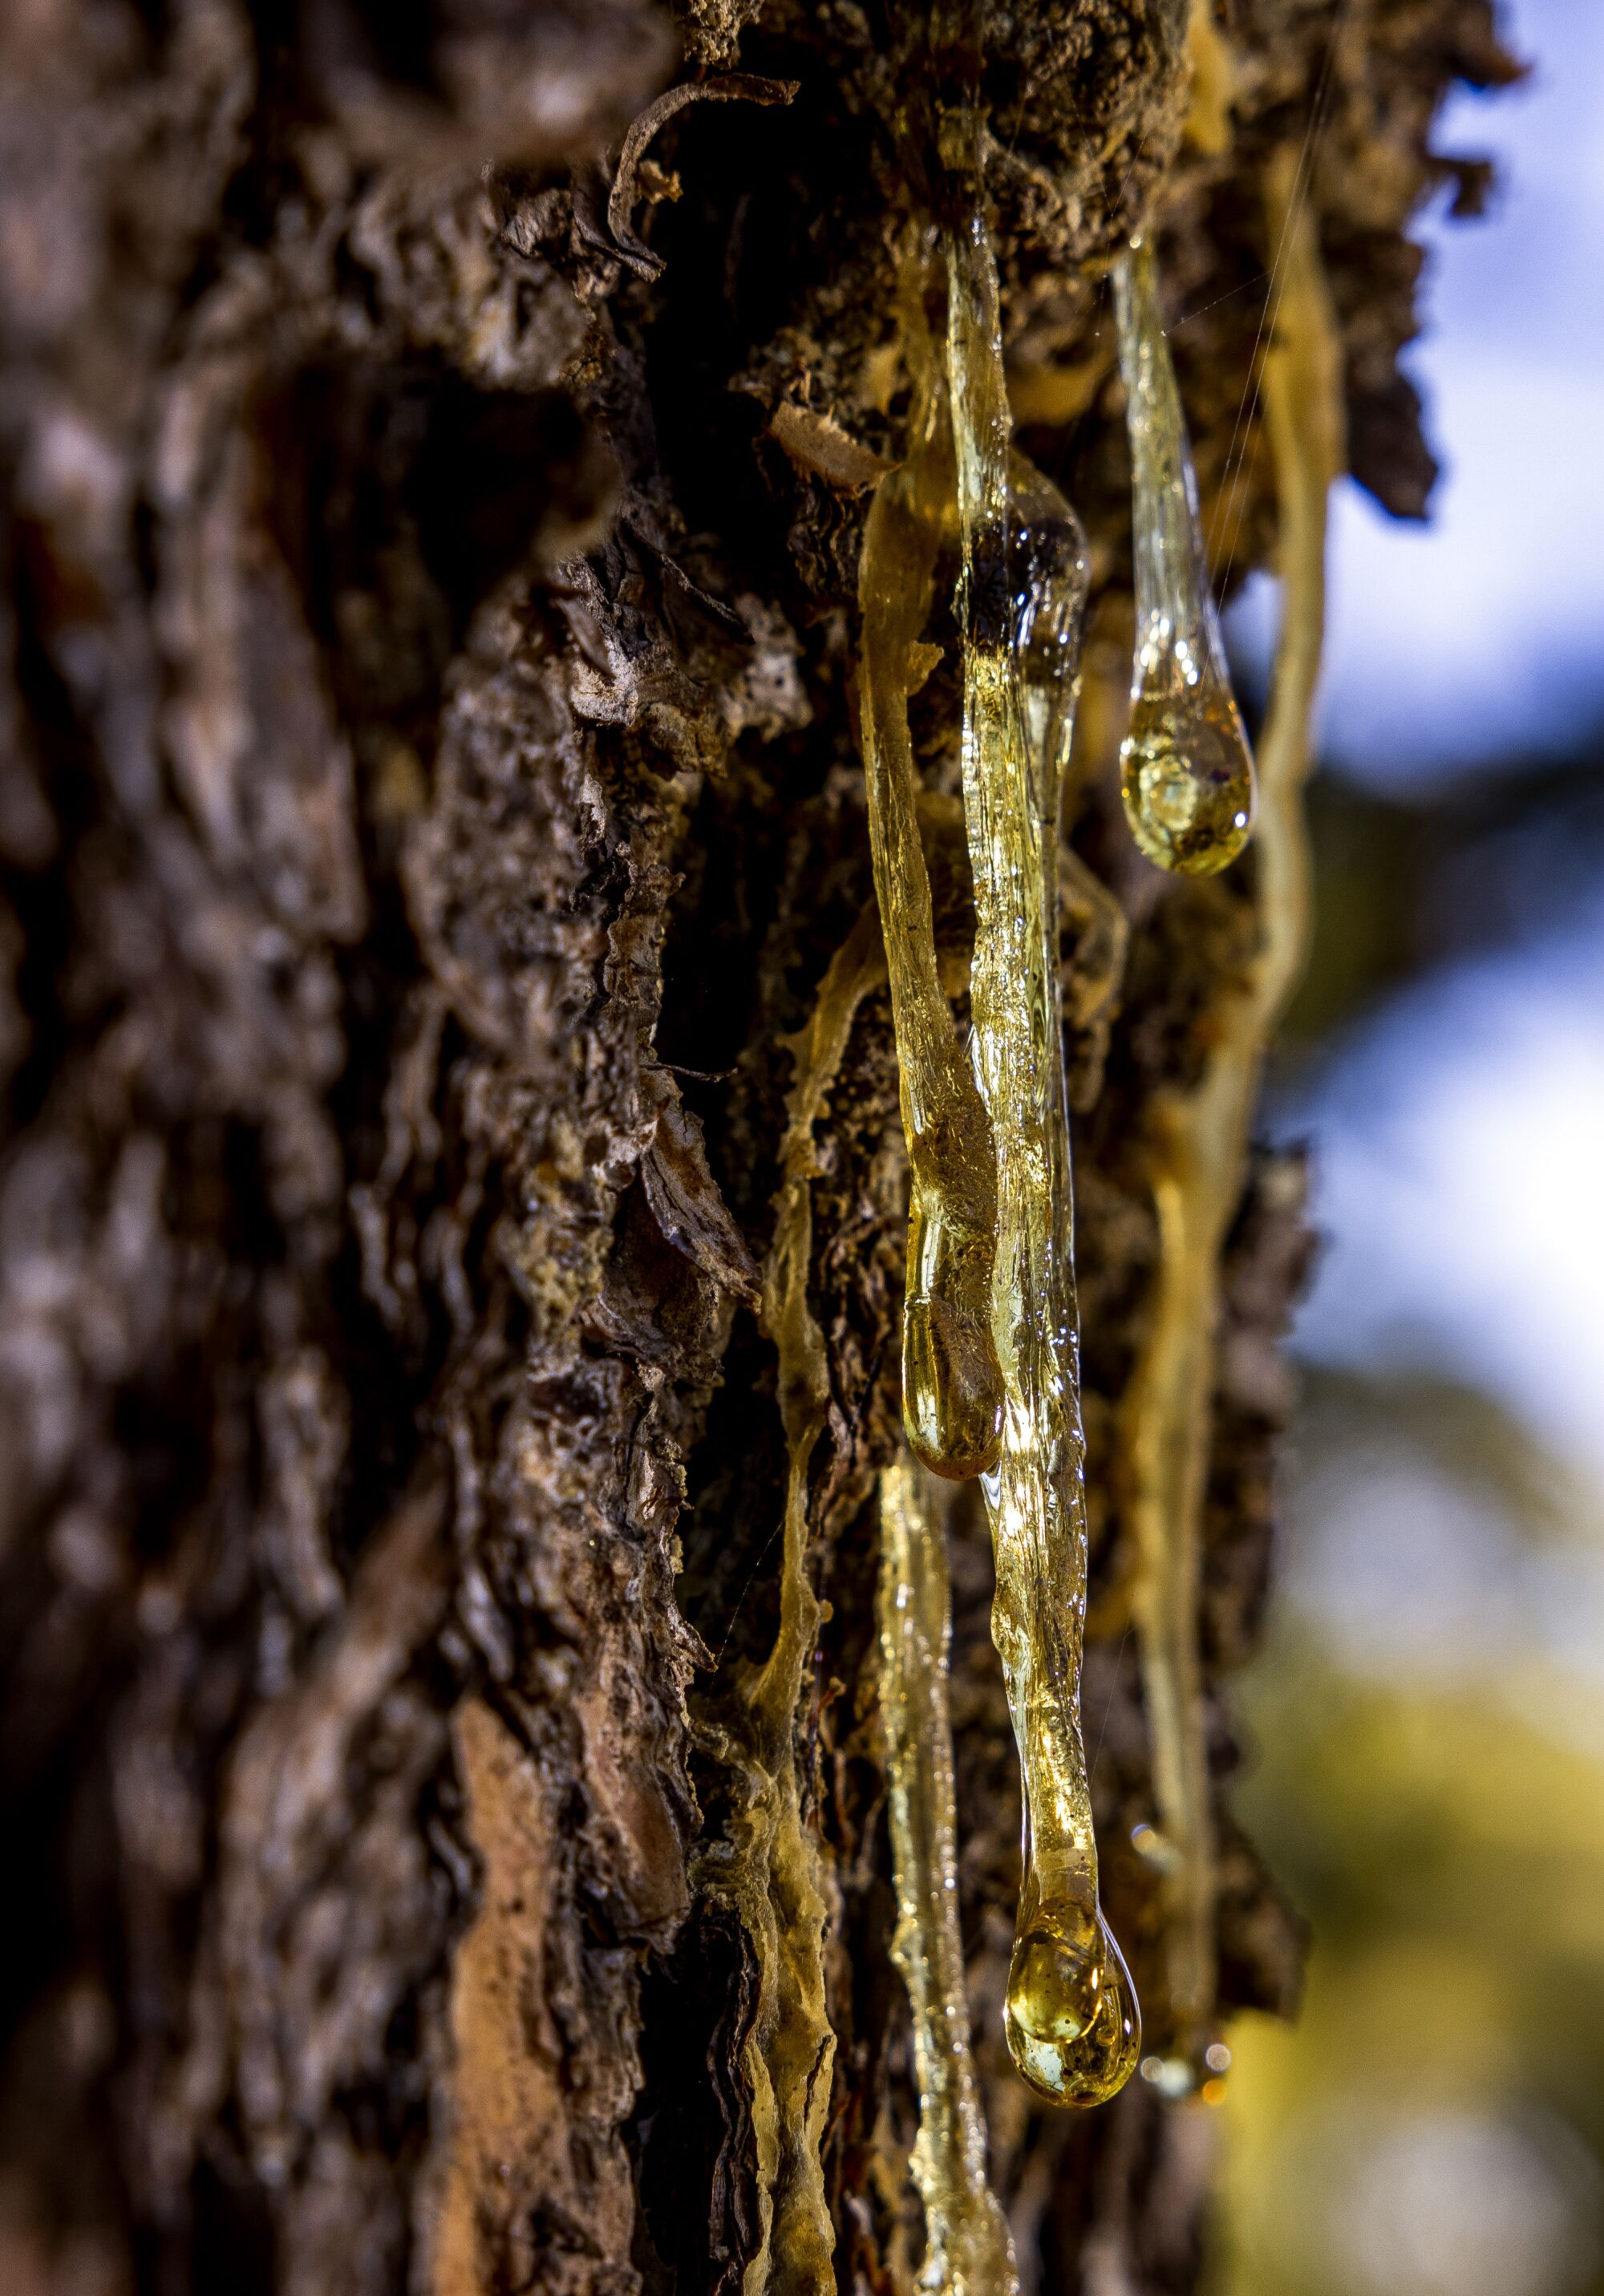 Resin oozes out of a Torrey pine tree trunk at the San Diego Botanic Garden in Encinitas on Friday, March 11, 2022. 